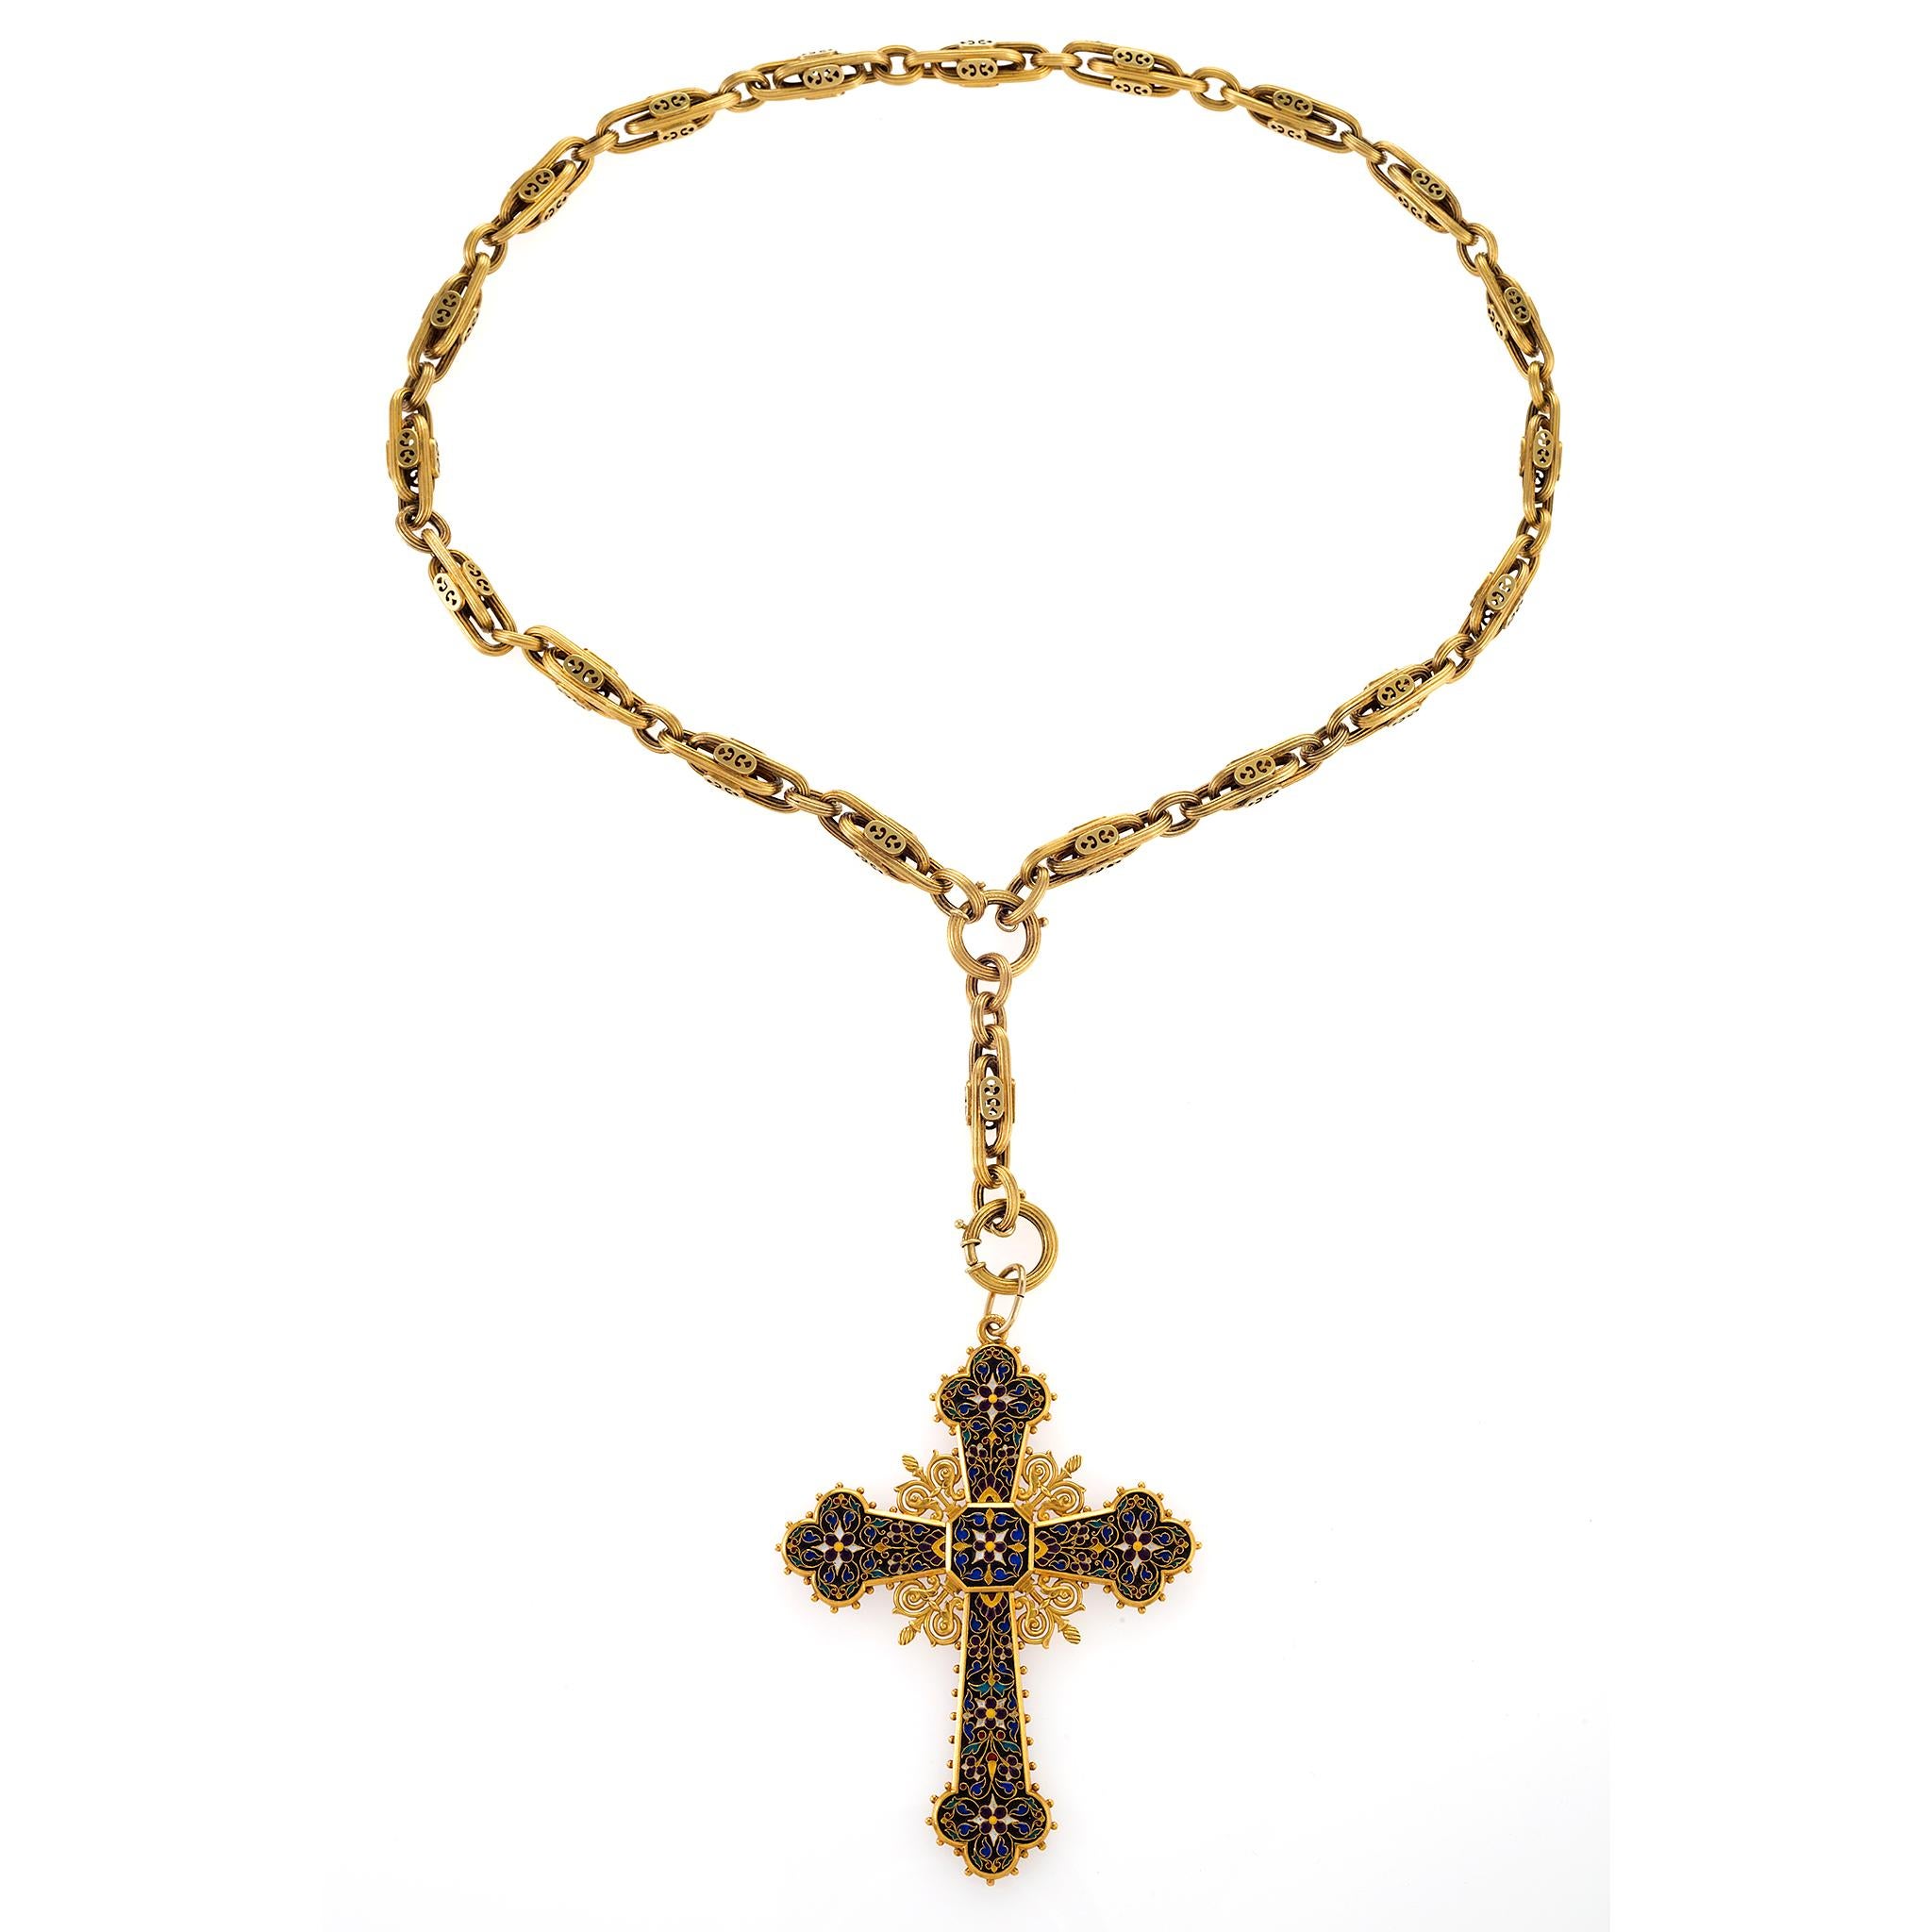 Highlighted by polychrome cloisonné enamel, this 19th century Latin cross pendant is intricately designed with glowing fields of multi-color enamel forming leafy vines and floral motifs. A masterpiece of enameling, it is suspended from an artful,